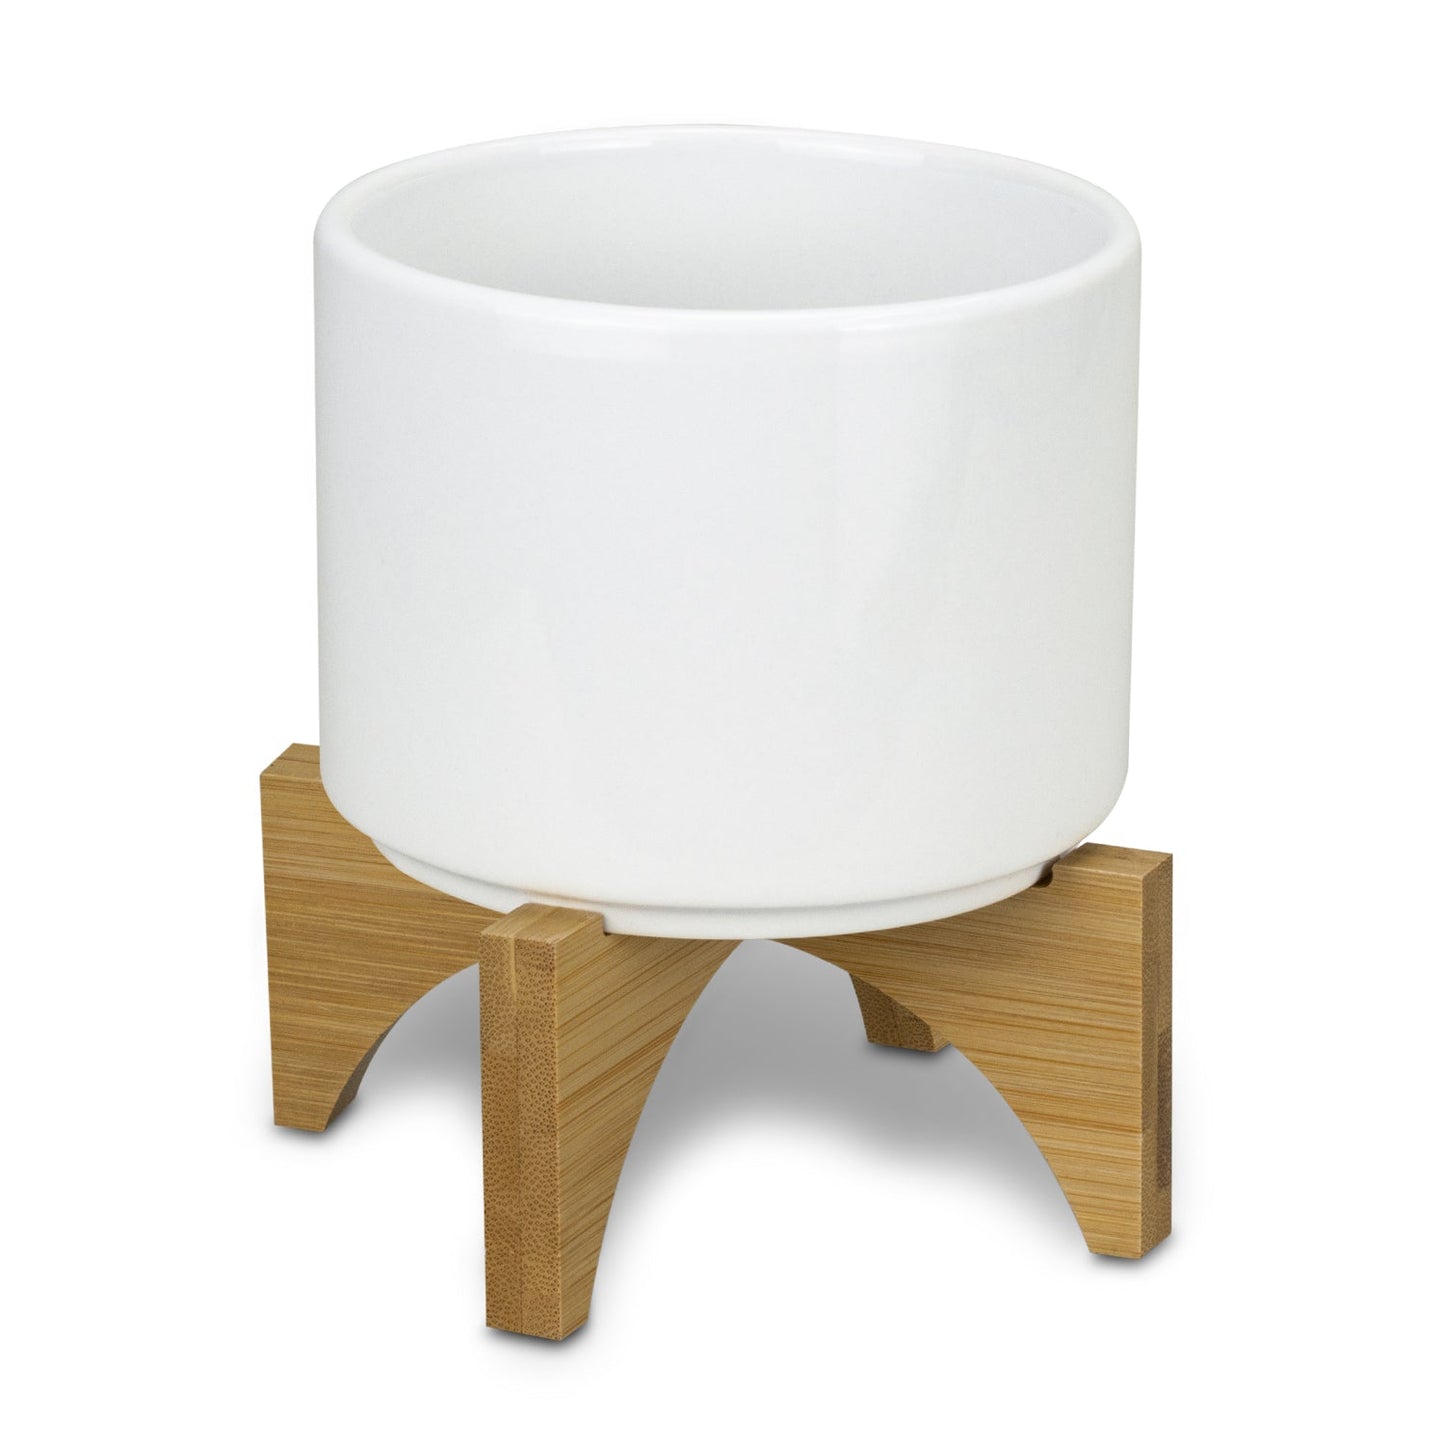 Planter with Bamboo Base- Price Includes printed logo